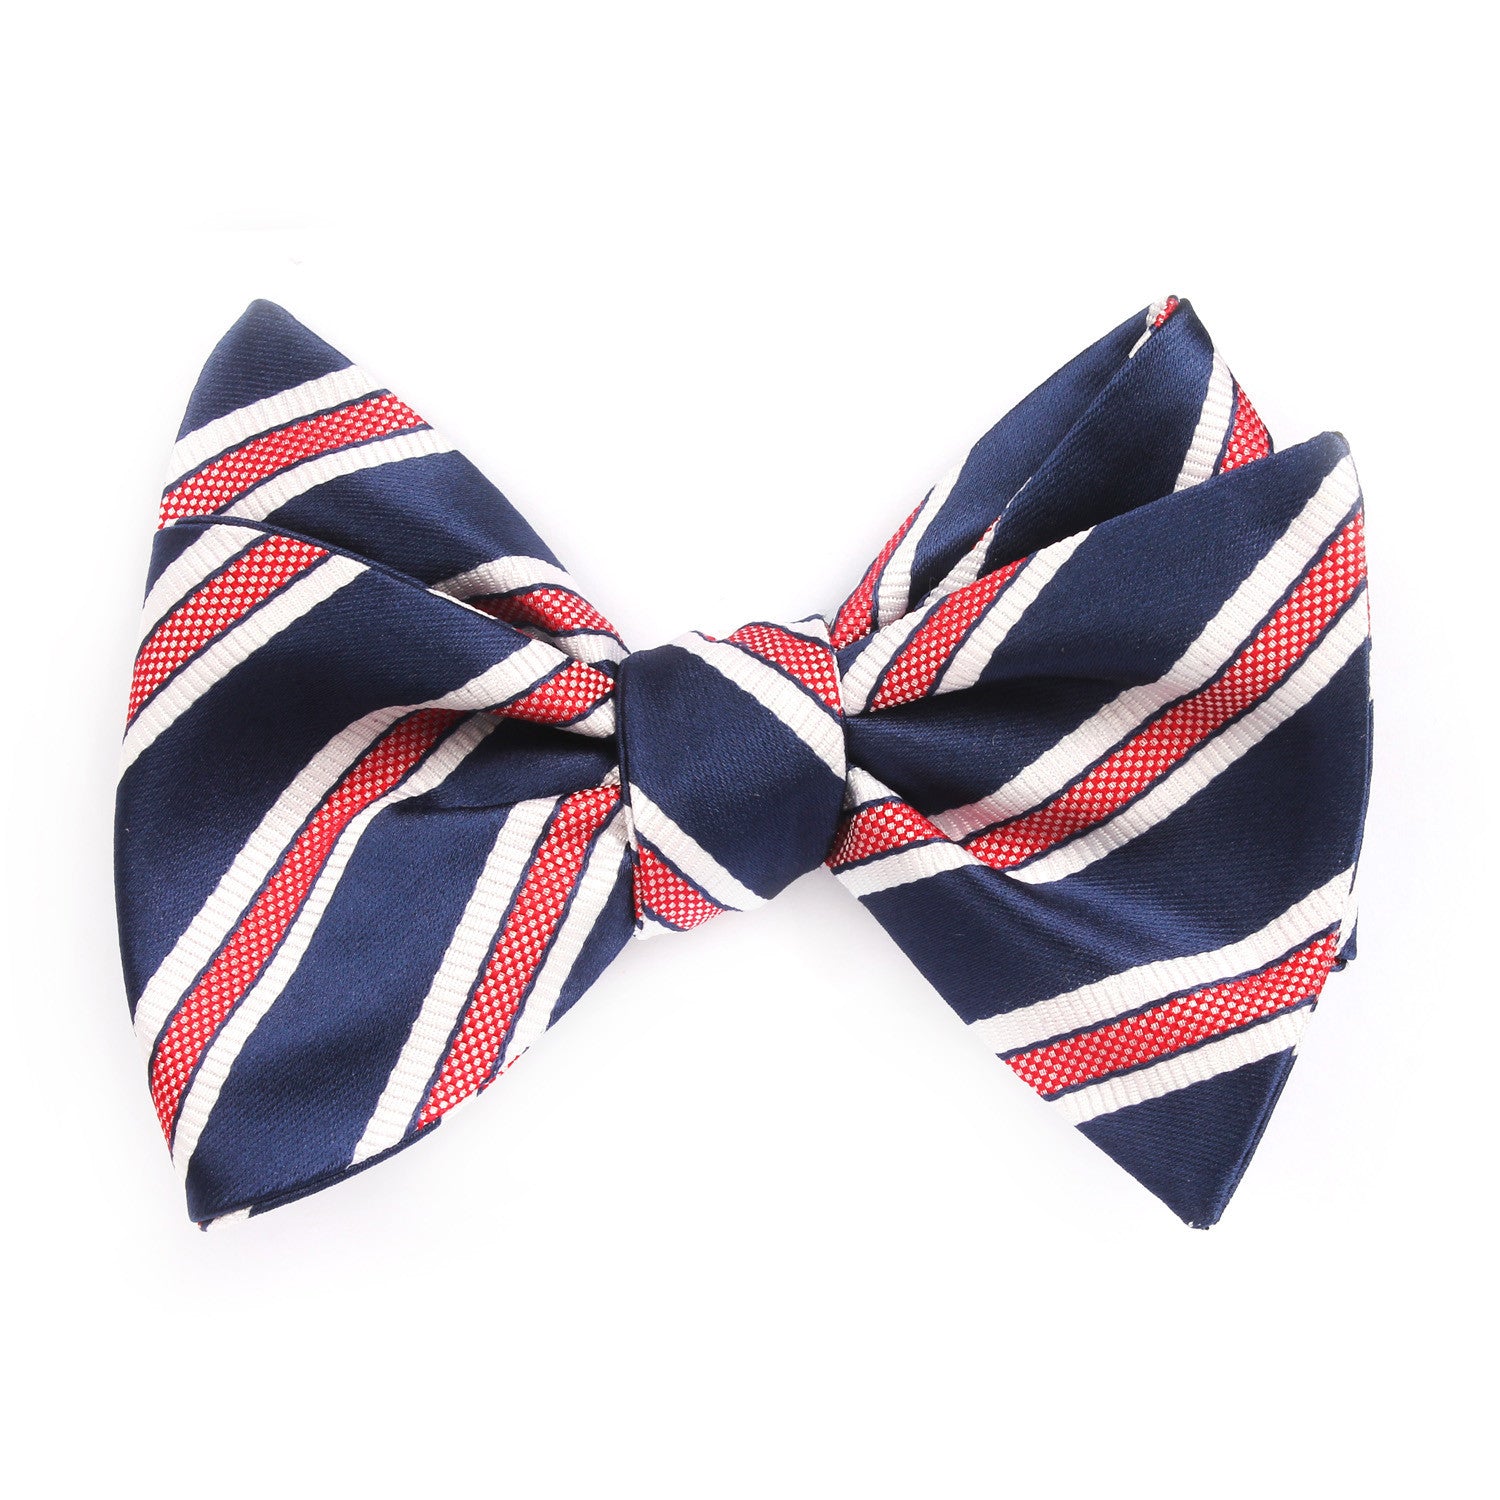 Navy Blue Bow Tie Untied with Red Stripes Self tied knot by OTAA